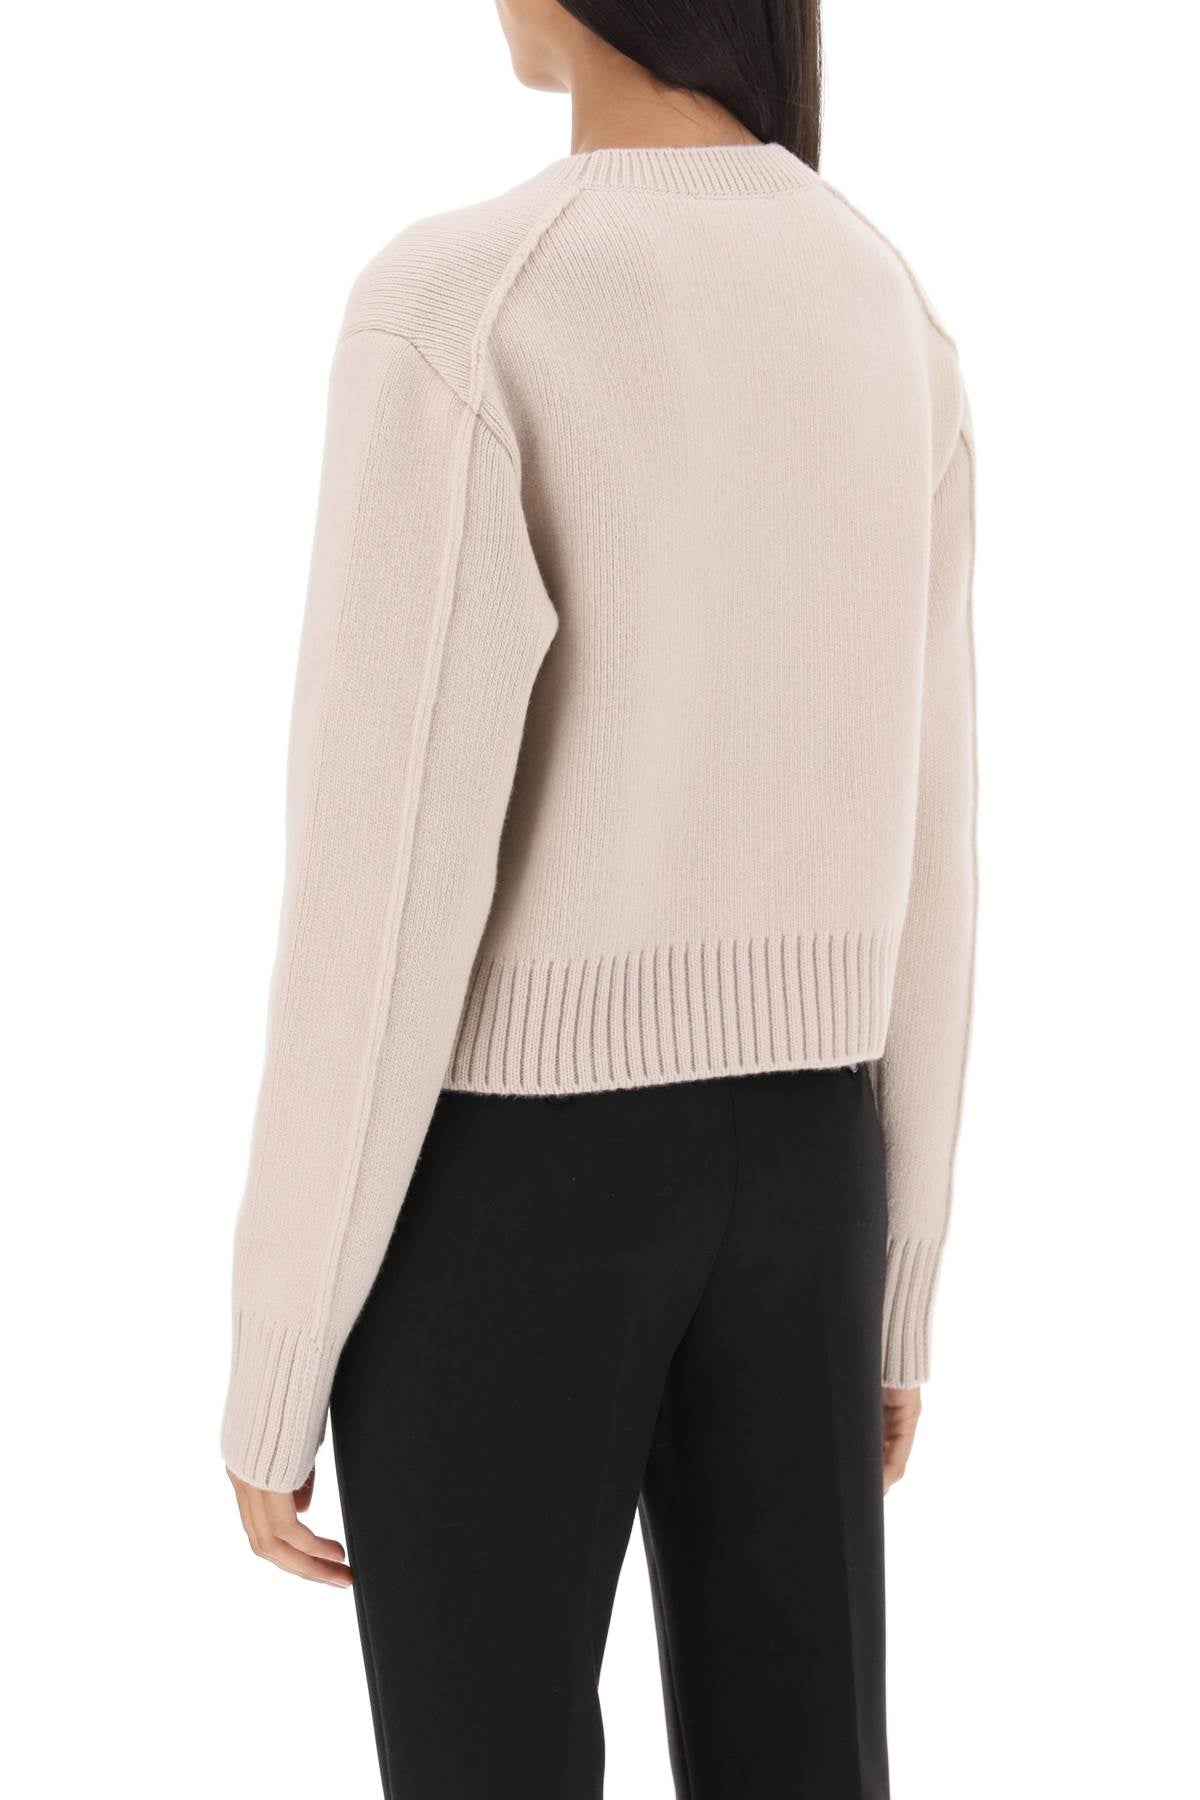 Lanvin cropped wool and cashmere sweater-2